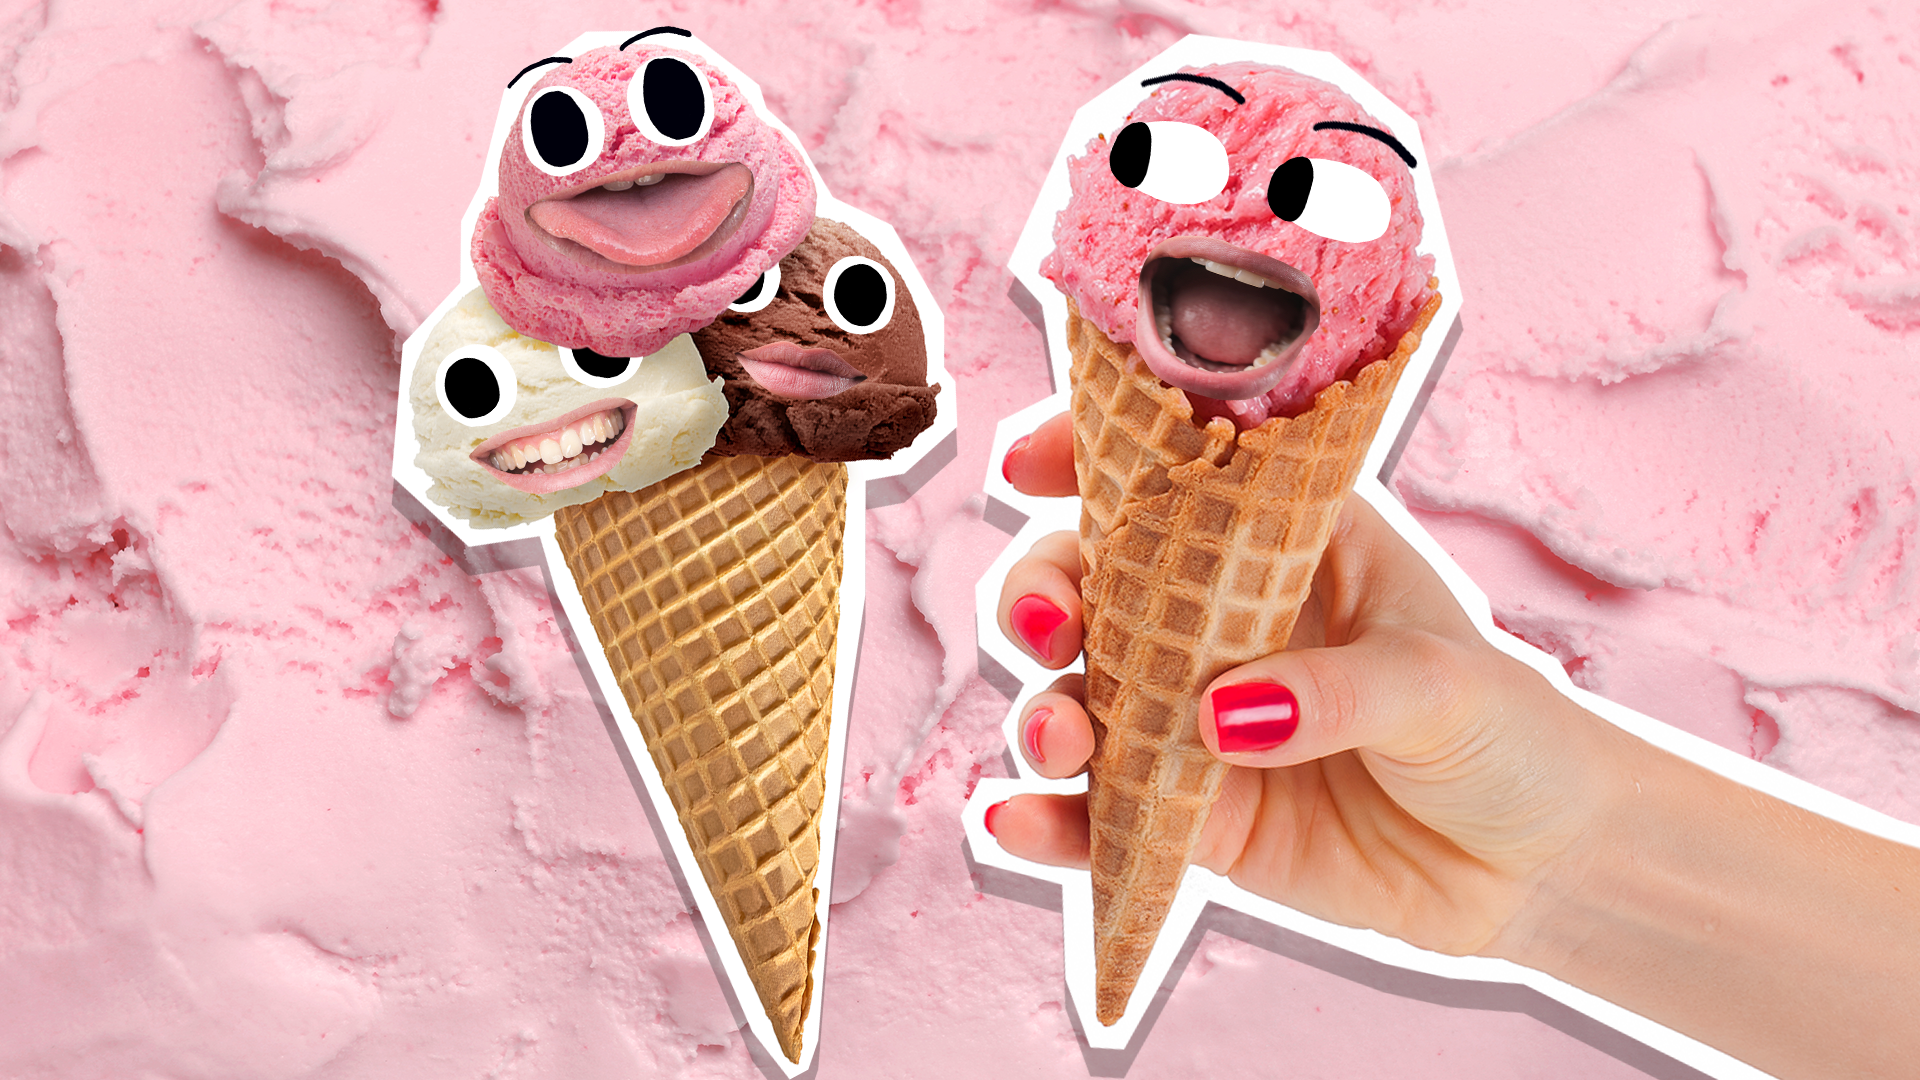 Ice creams with googly eyes